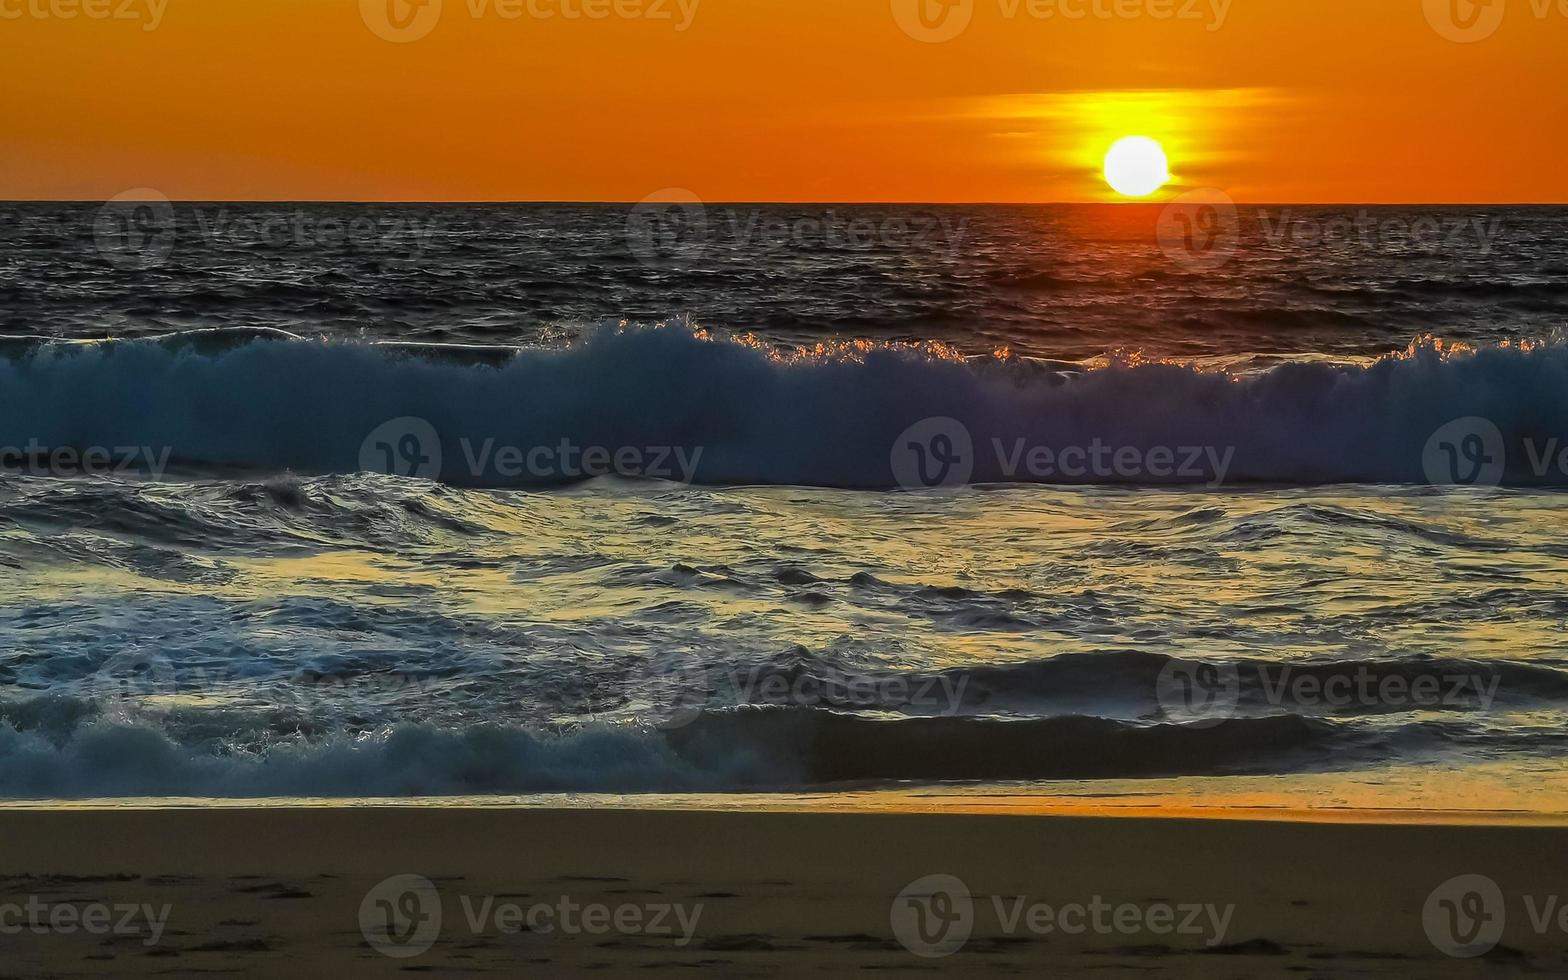 Colorful golden sunset big wave and beach Puerto Escondido Mexico. photo